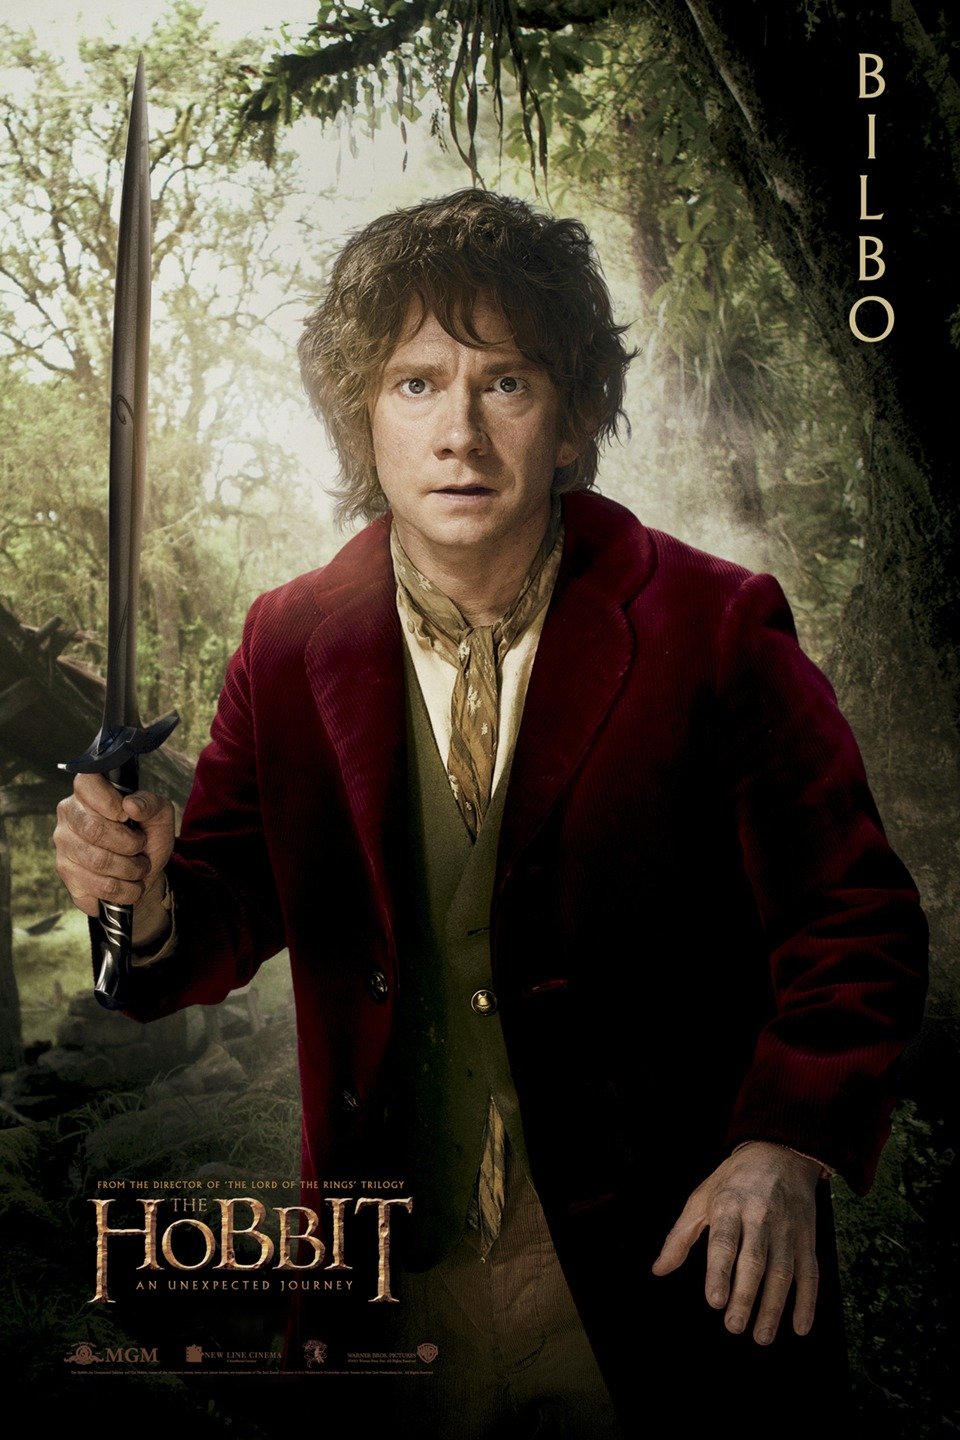 The Hobbit An Unexpected Journey (2012) 1080p Extended DTS-HD